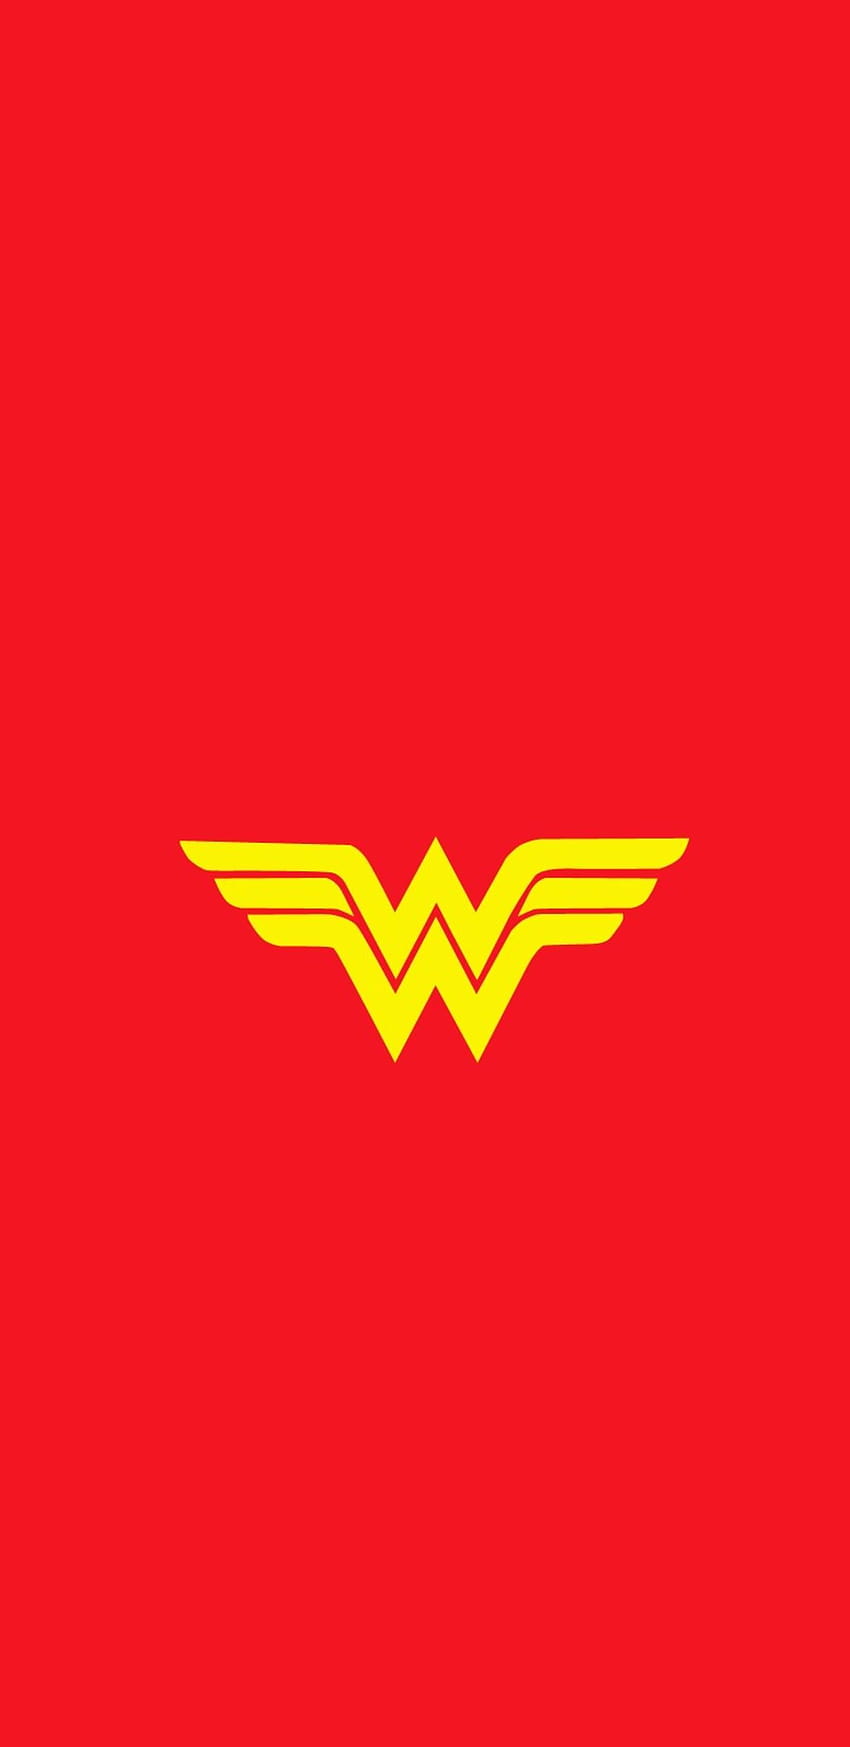 1440x2960 Wonder Woman Logo Samsung Galaxy Note 9,8, S9,S8,S Q, red android logo HD phone wallpaper